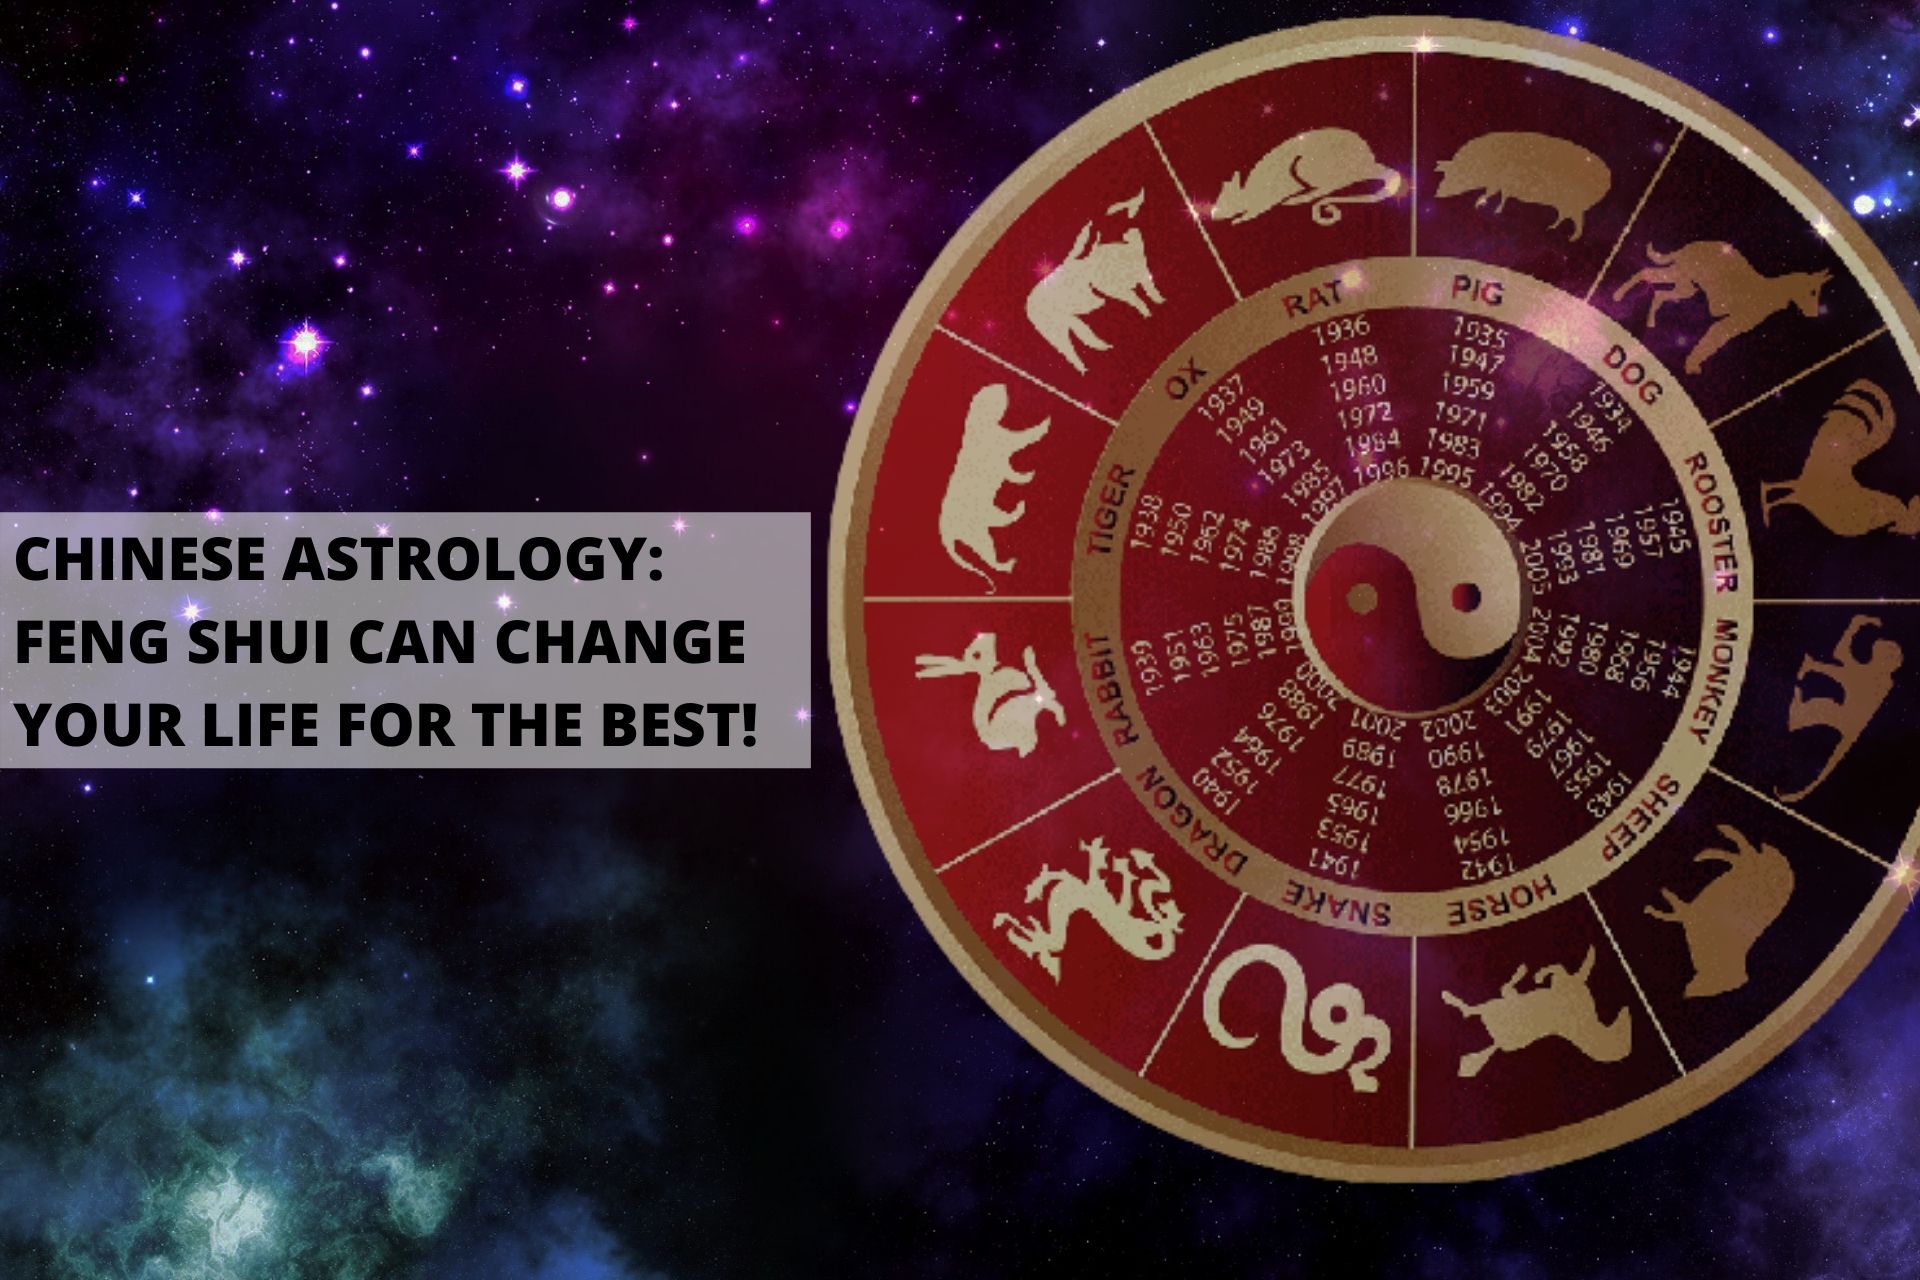 Chinese Astrology: Feng Shui Can Change Your Life For The Best!